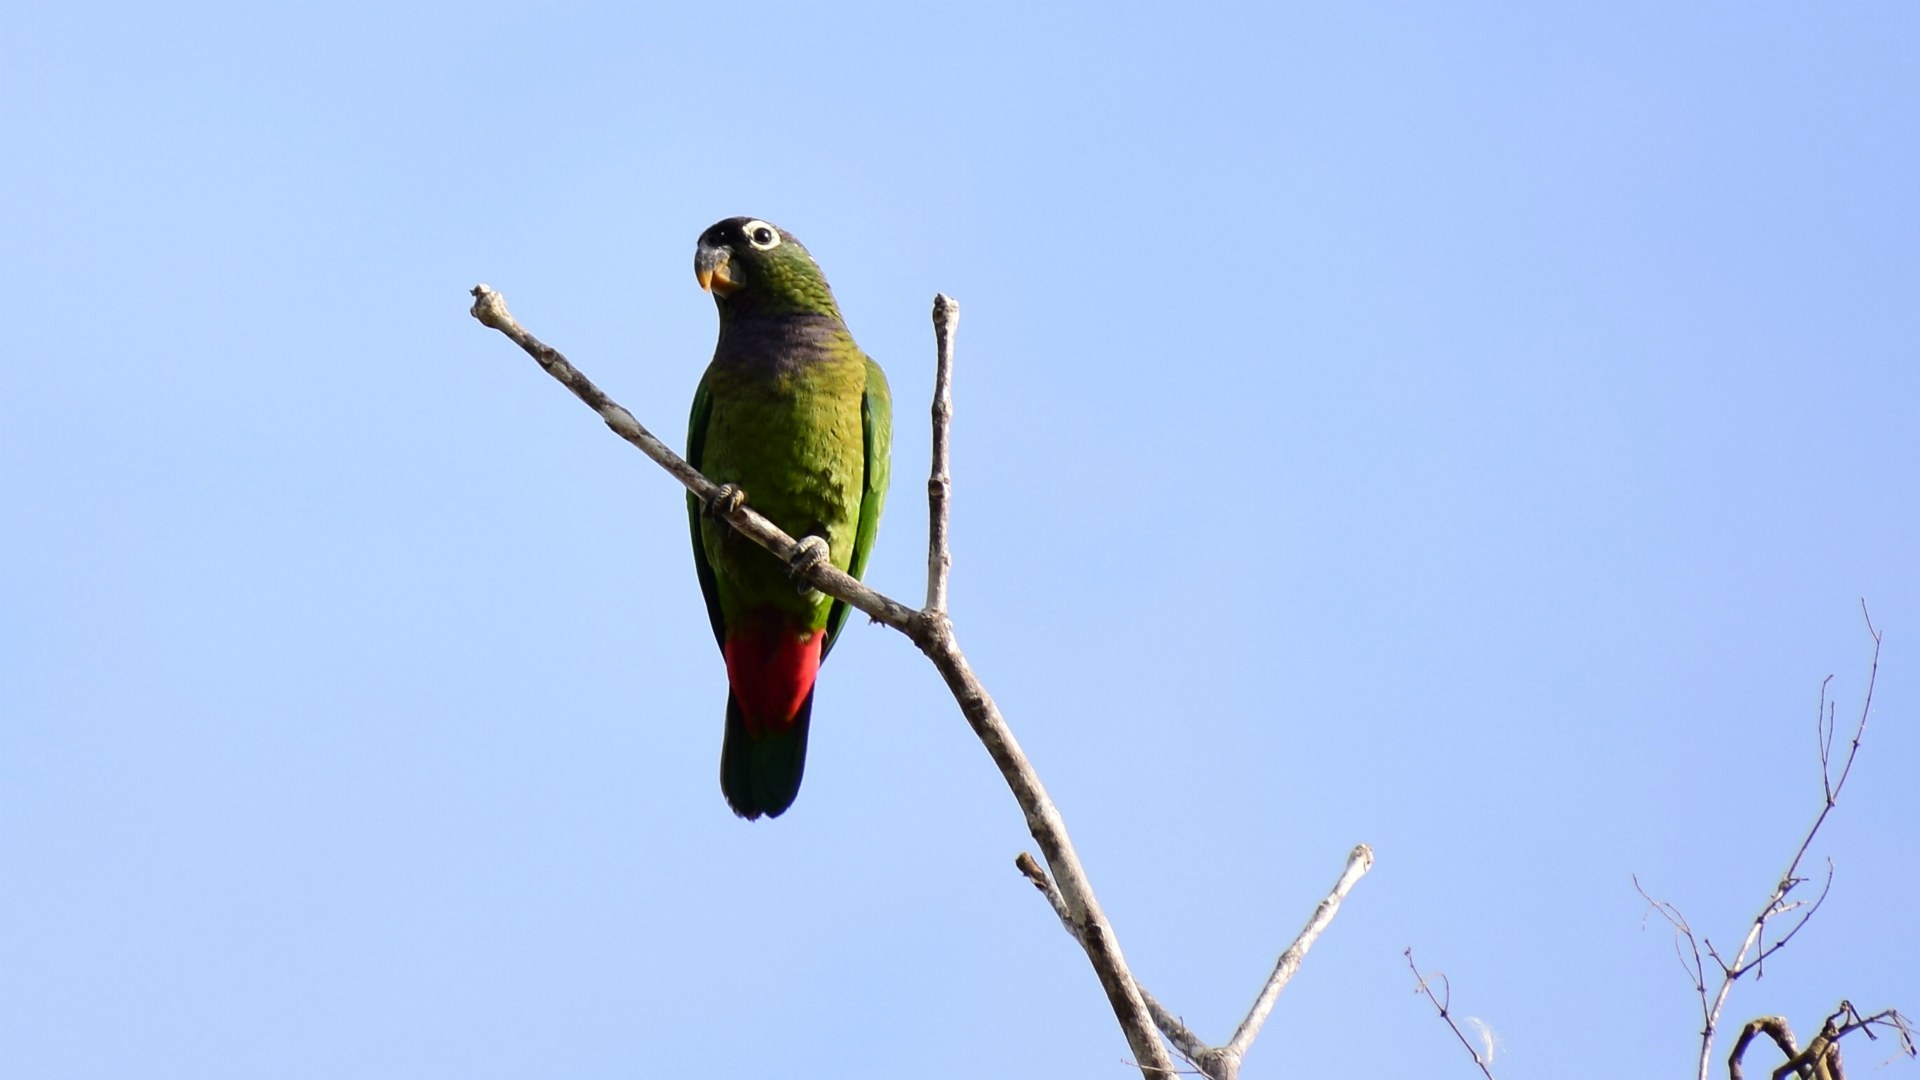 Scaly-headed Parrot, Southern Pantanal